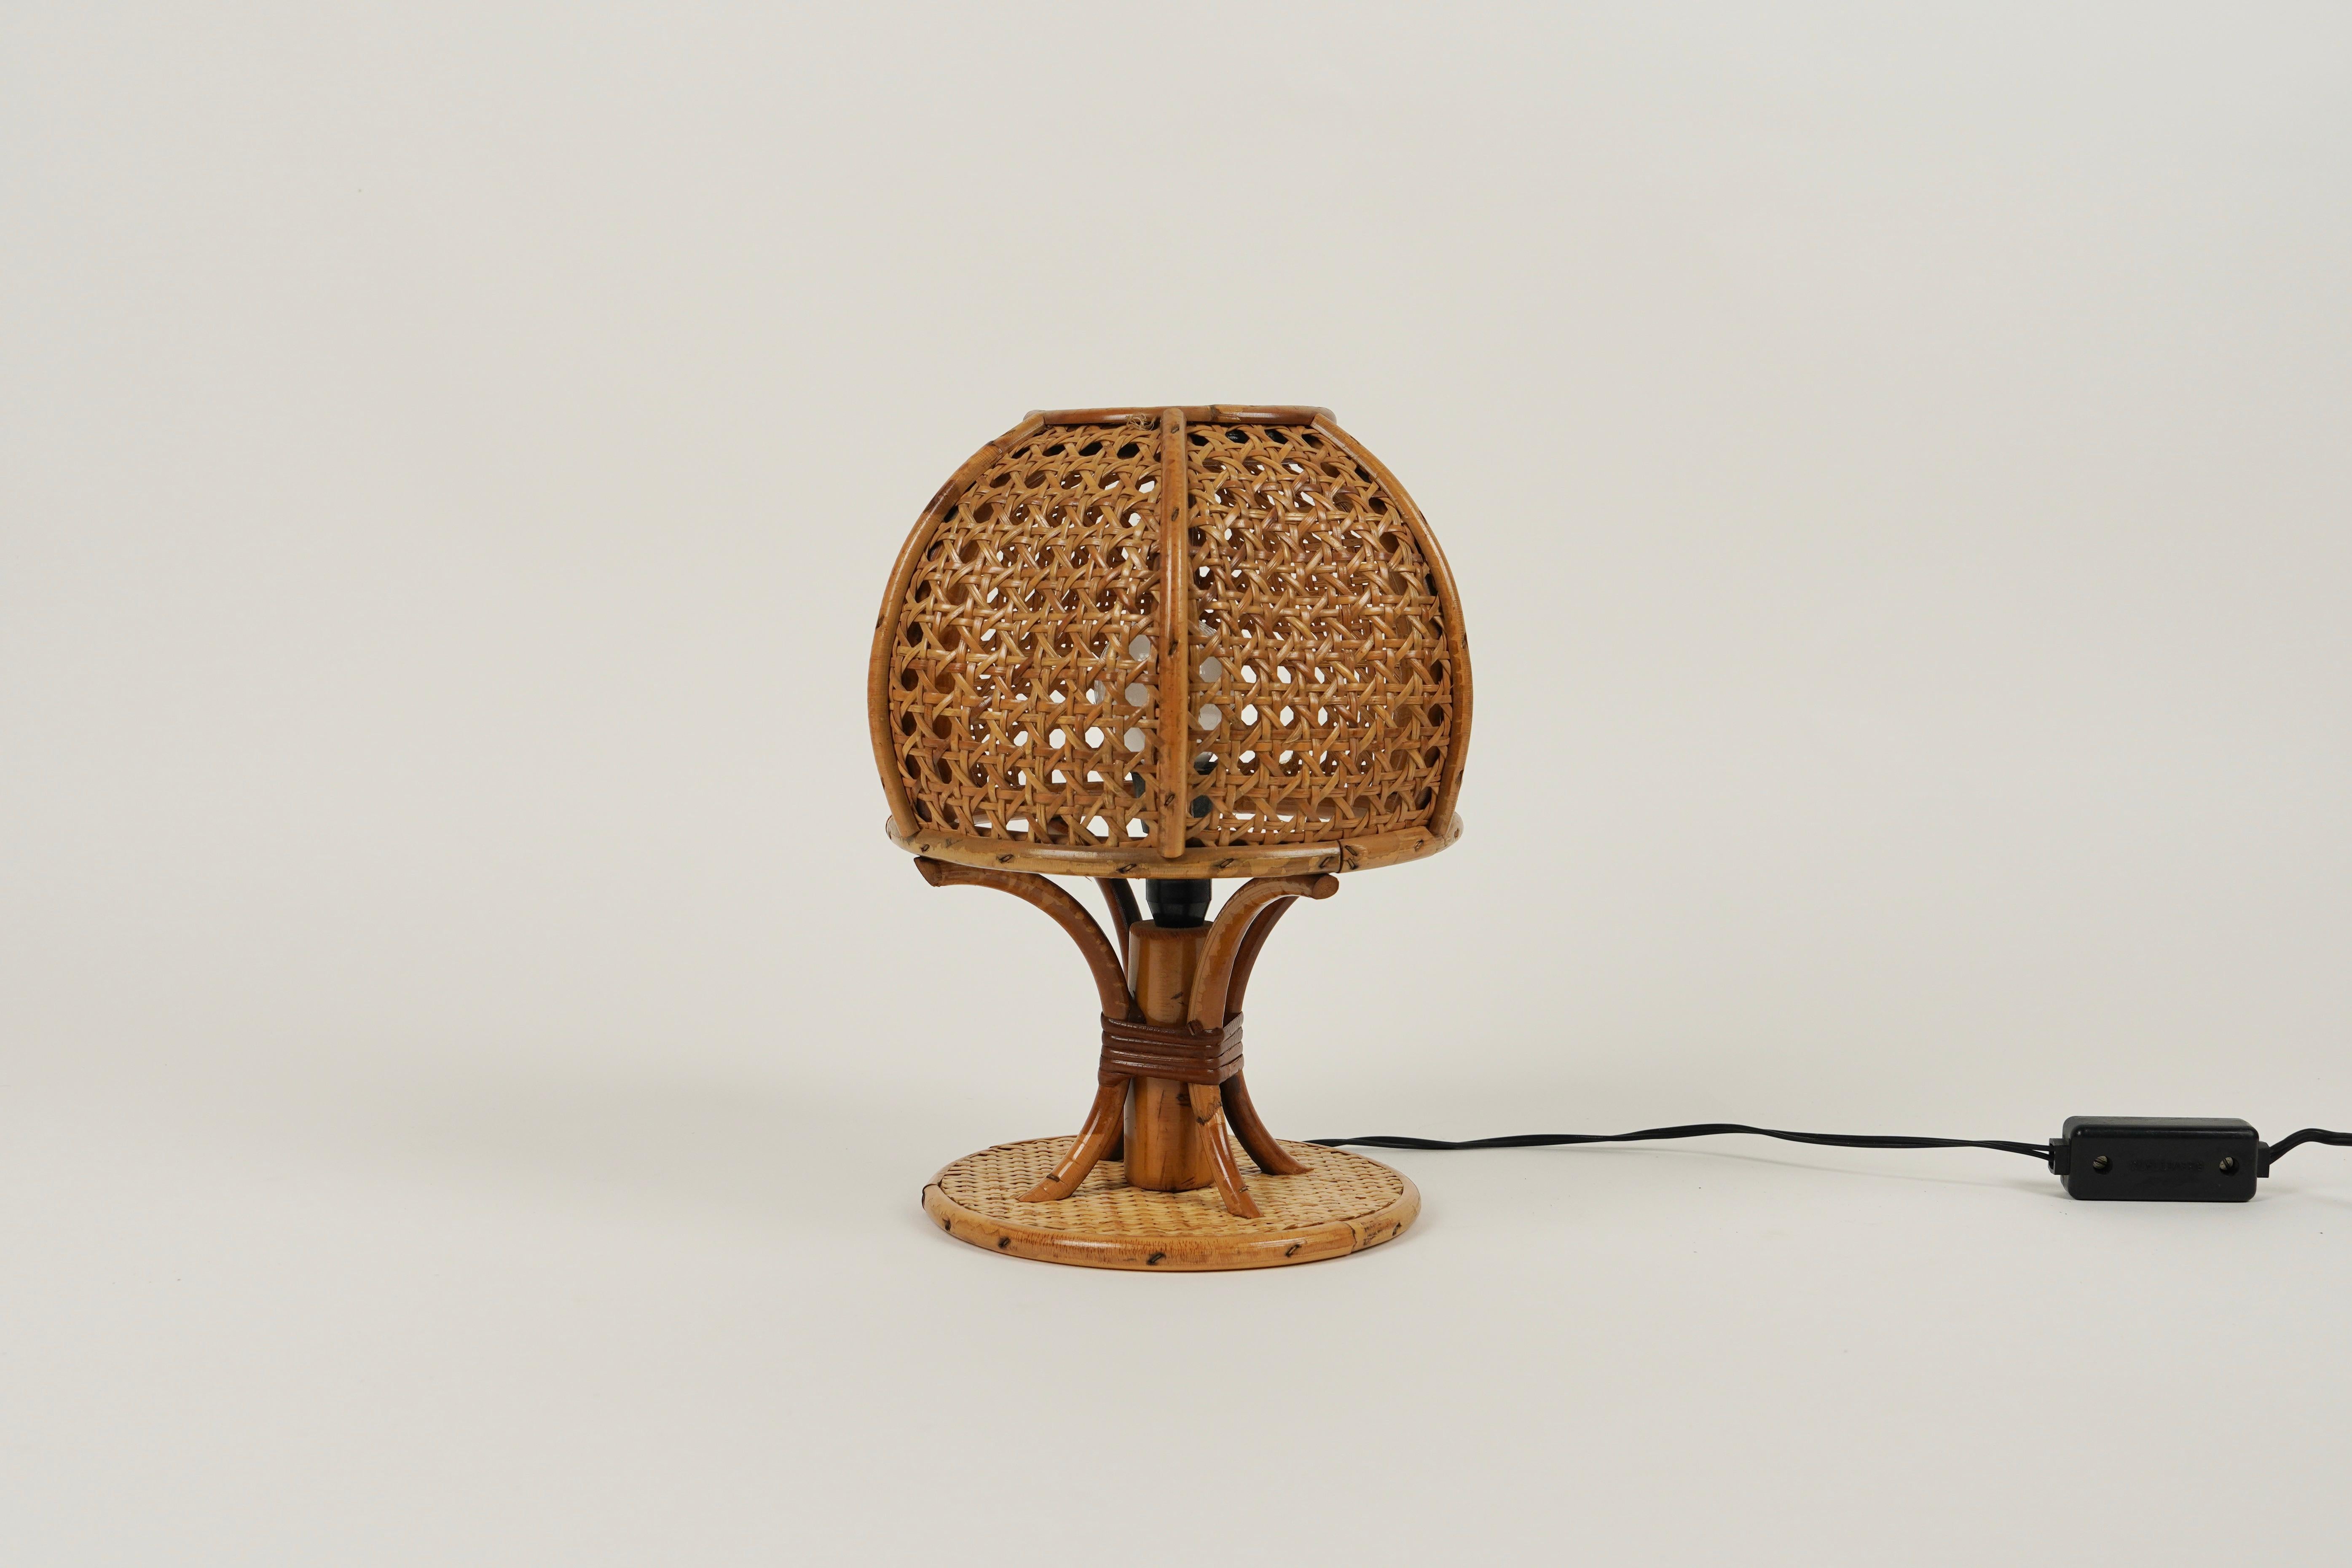 Late 20th Century Midcentury Rattan and Wicker Table Lamp Louis Sognot Style, Italy, circa 1970s For Sale